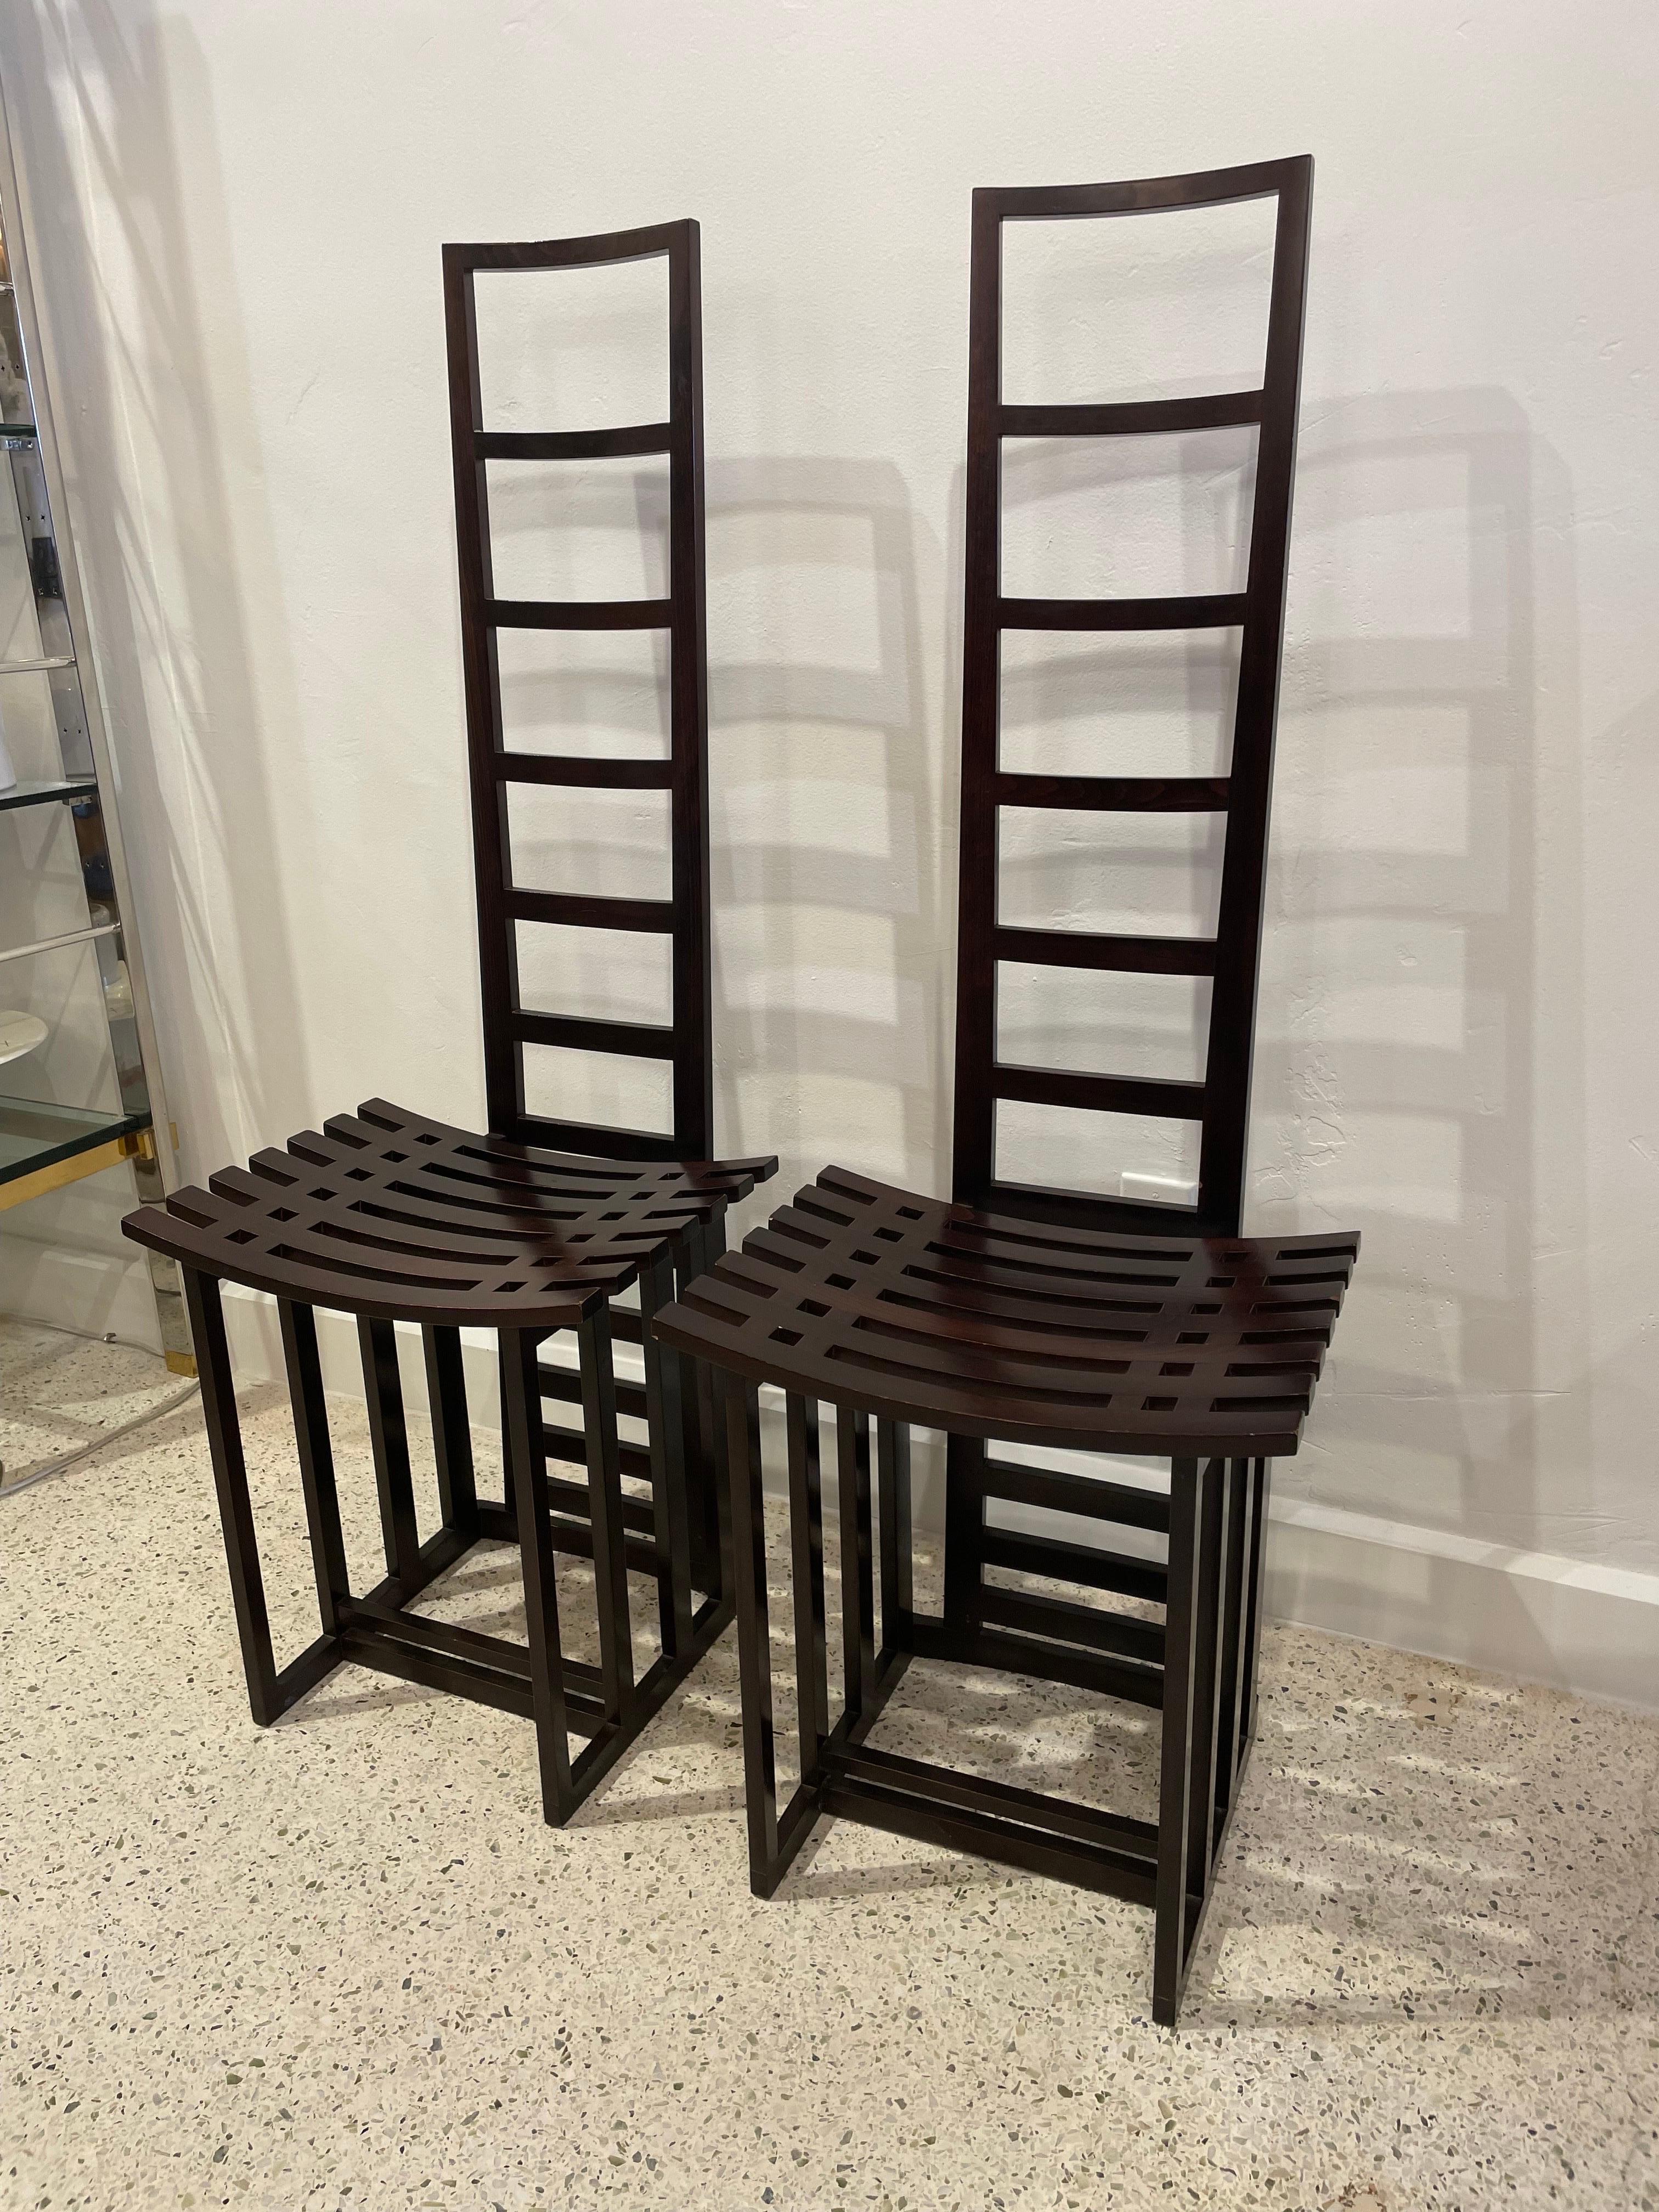 Extremely stylish and architectural designed ladder back chairs in a rich ebonized wood.